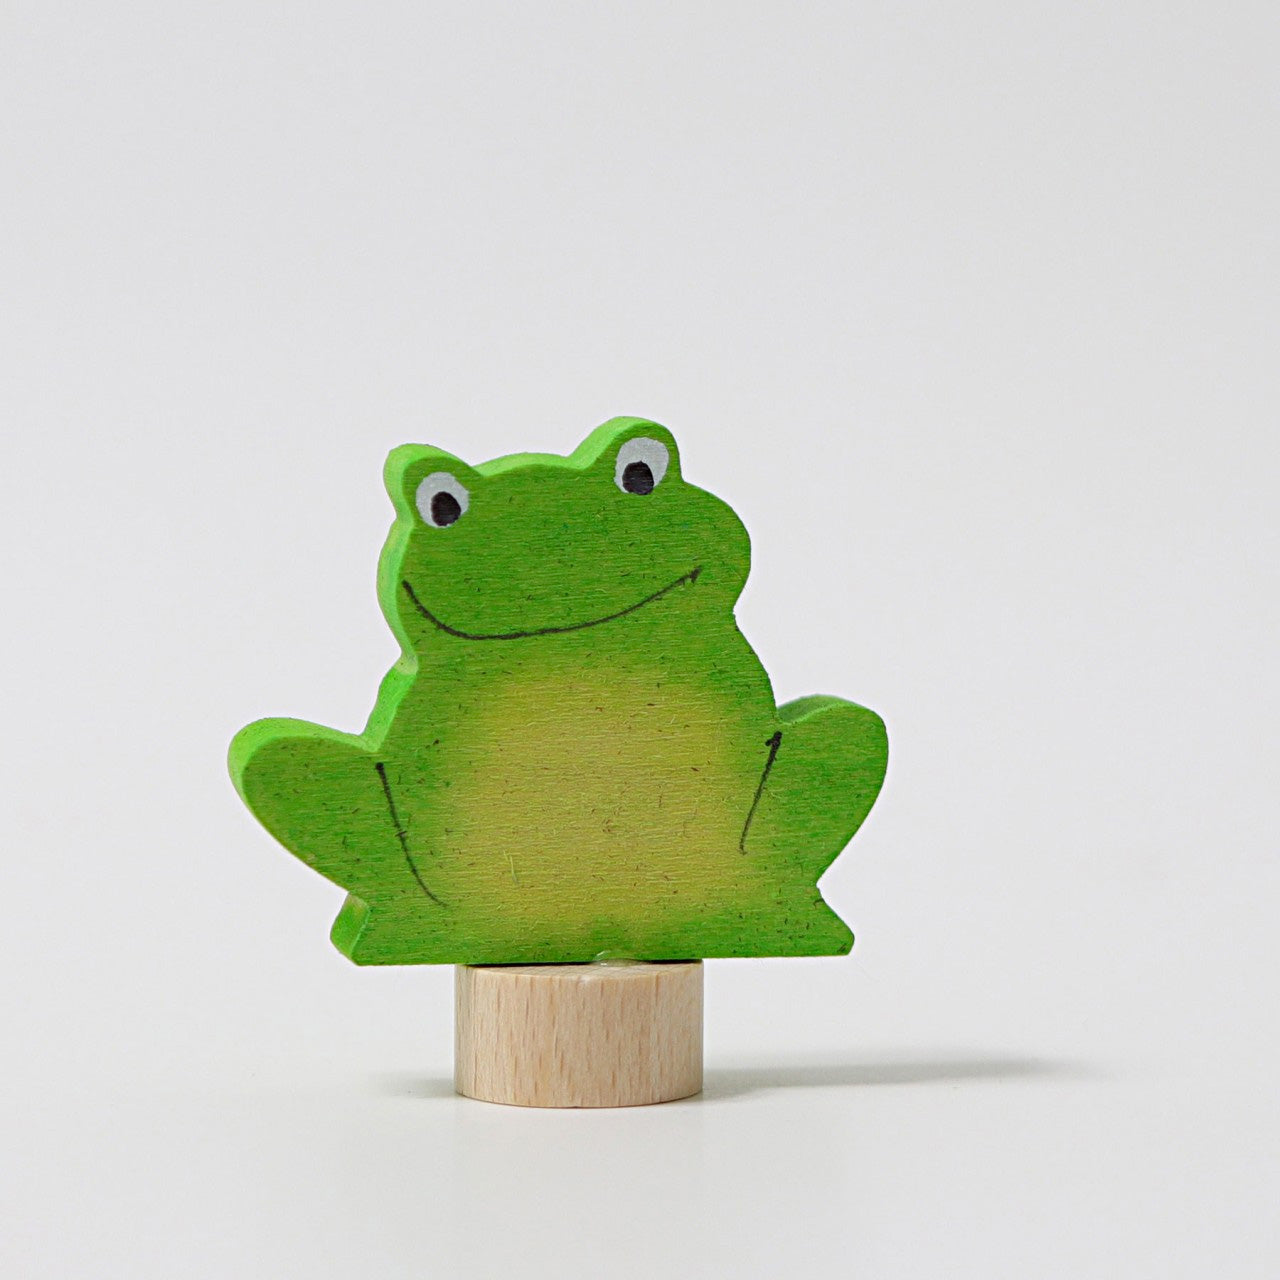 Green frog ornament made of wood for celebration rings